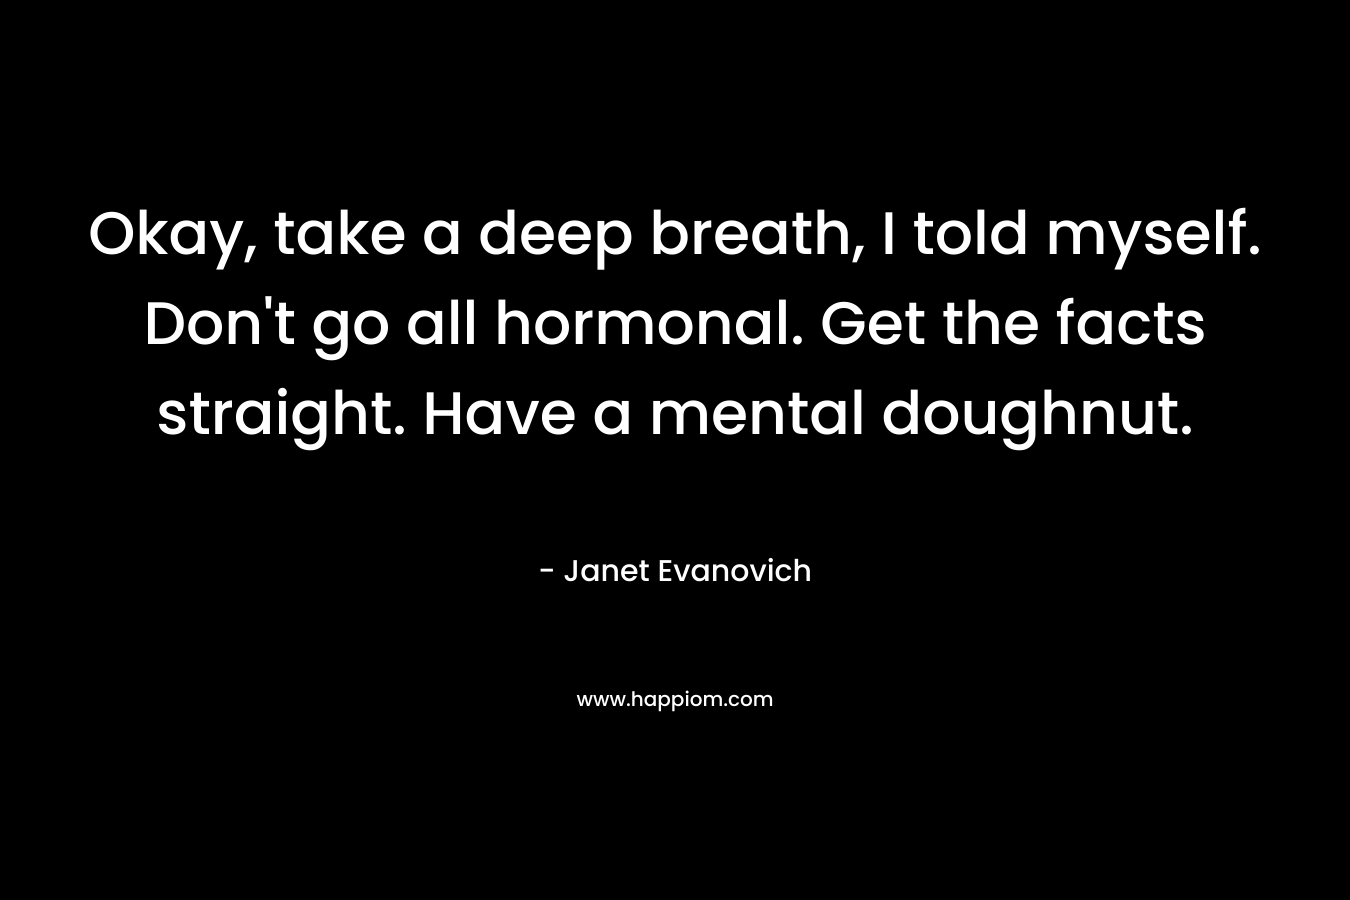 Okay, take a deep breath, I told myself. Don’t go all hormonal. Get the facts straight. Have a mental doughnut. – Janet Evanovich